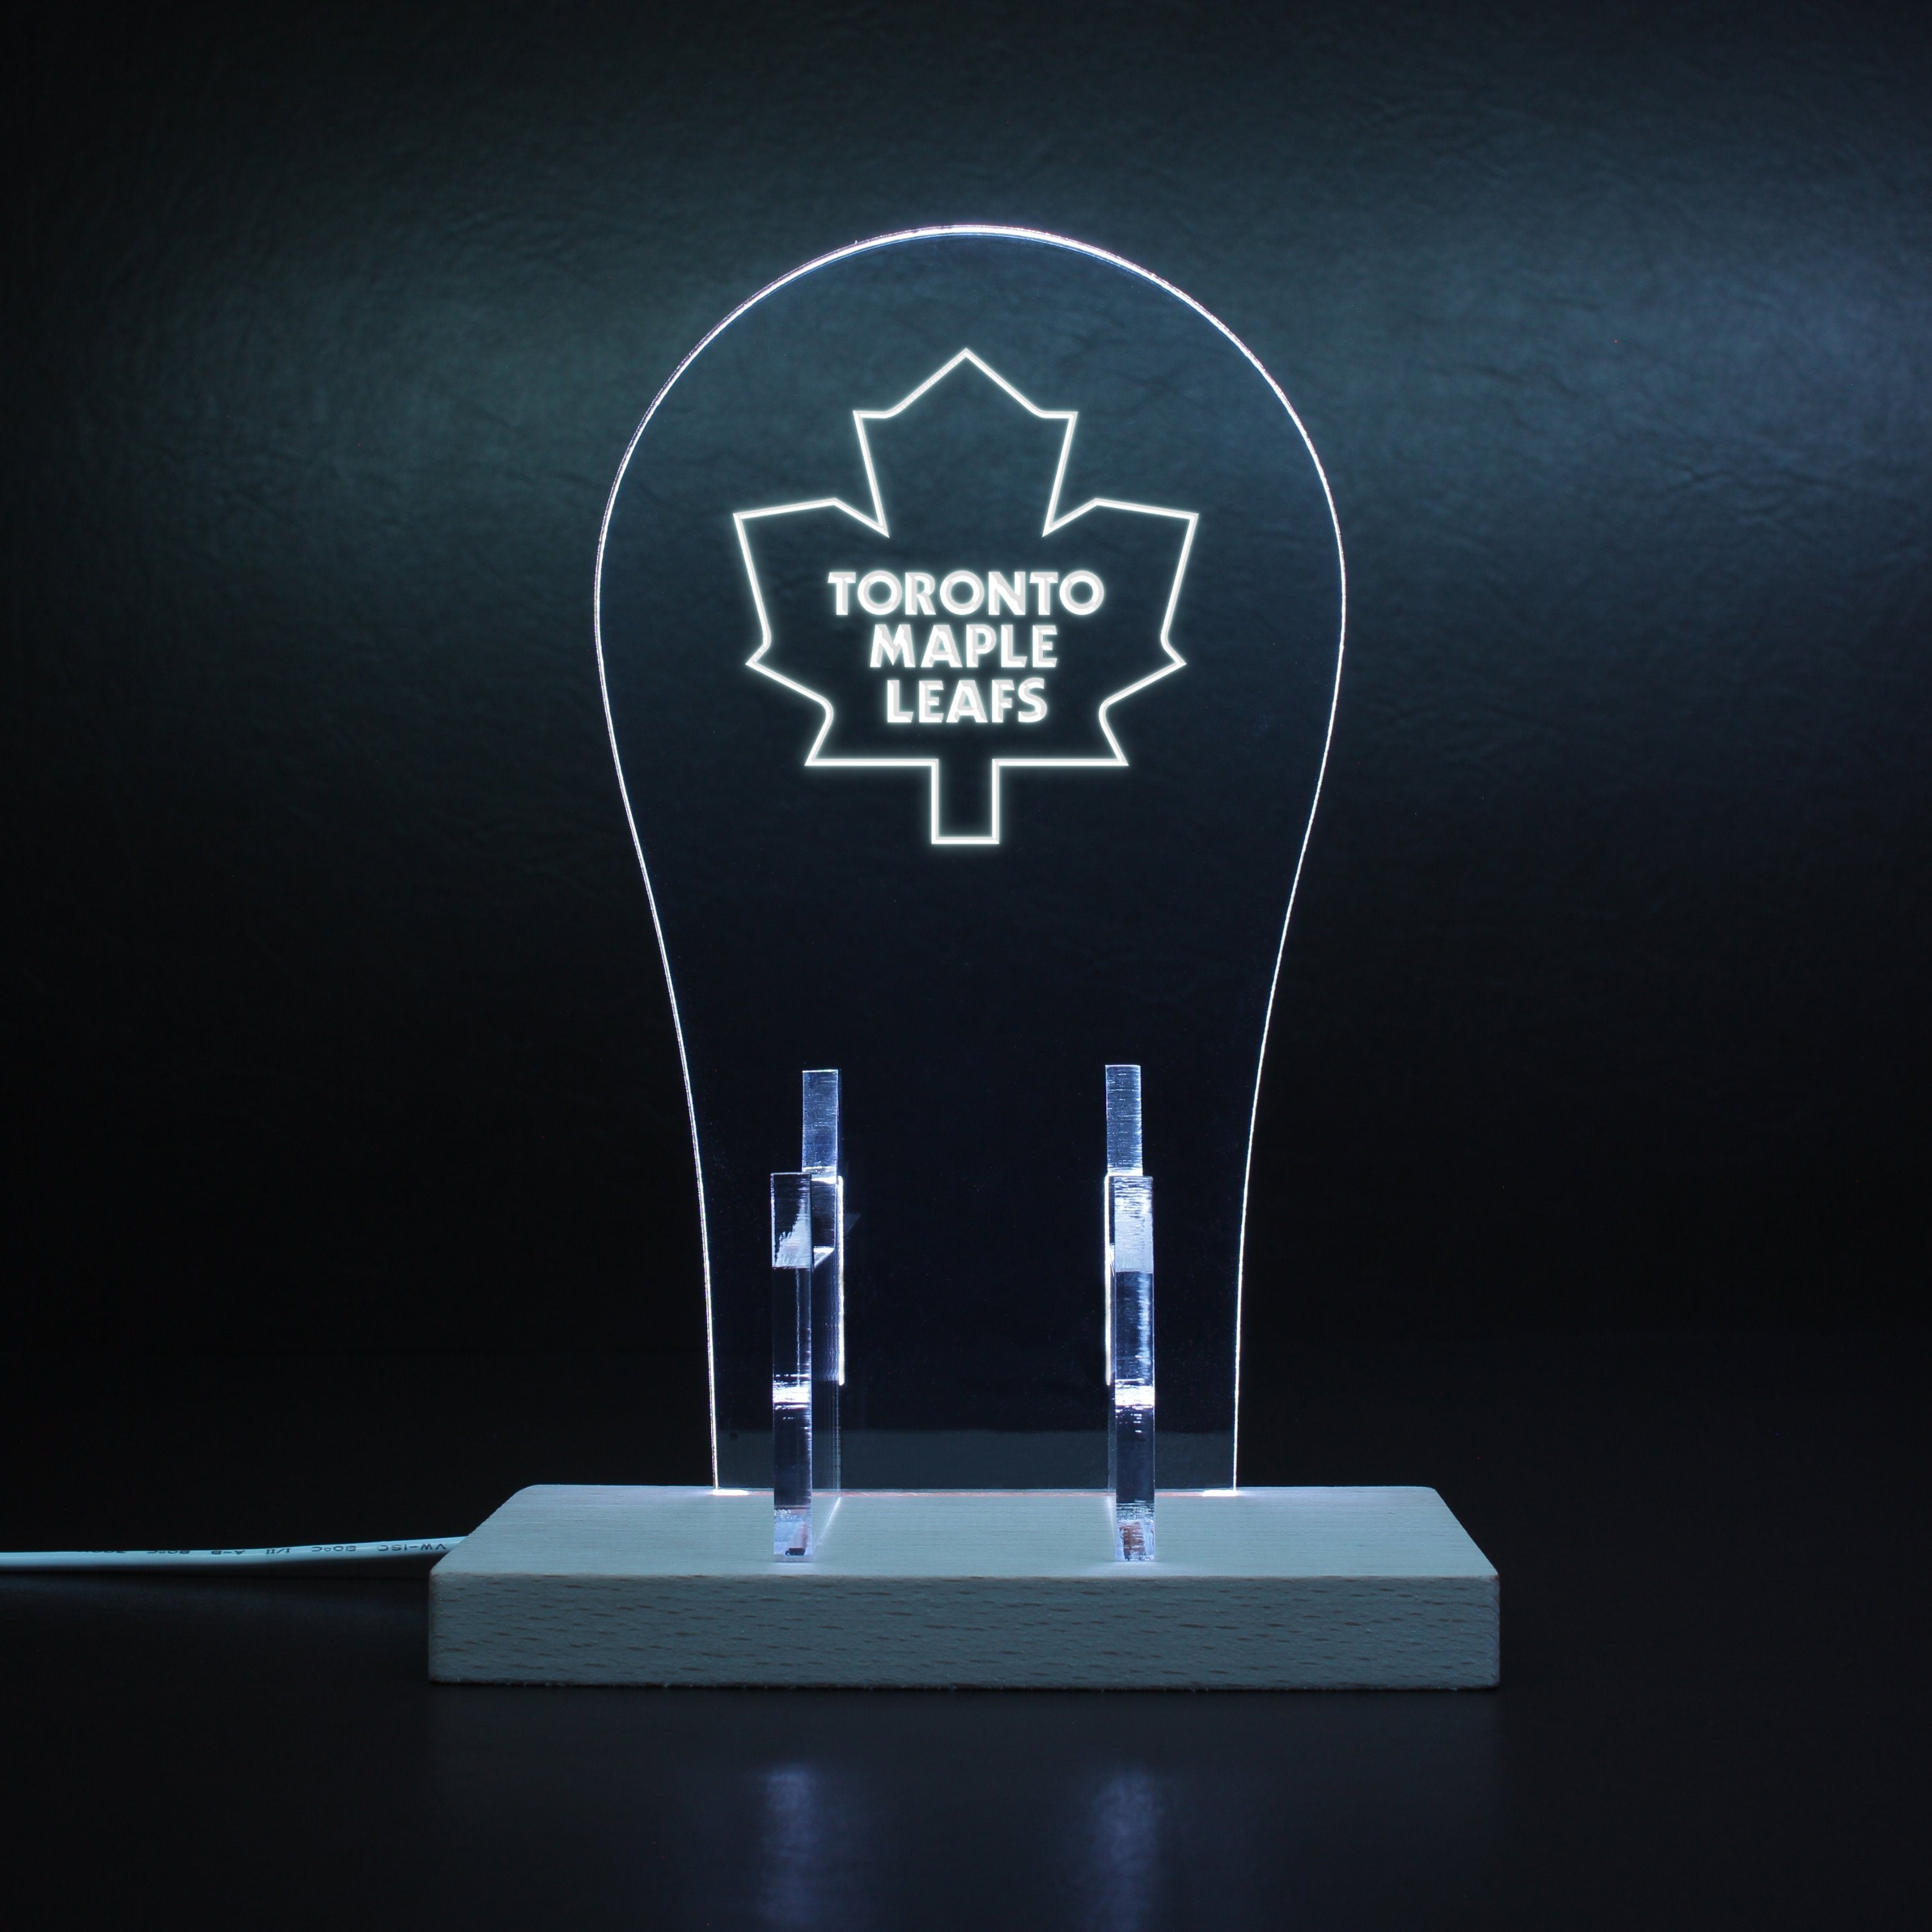 Toronto Maple Leafs LED Gaming Headset Controller Stand